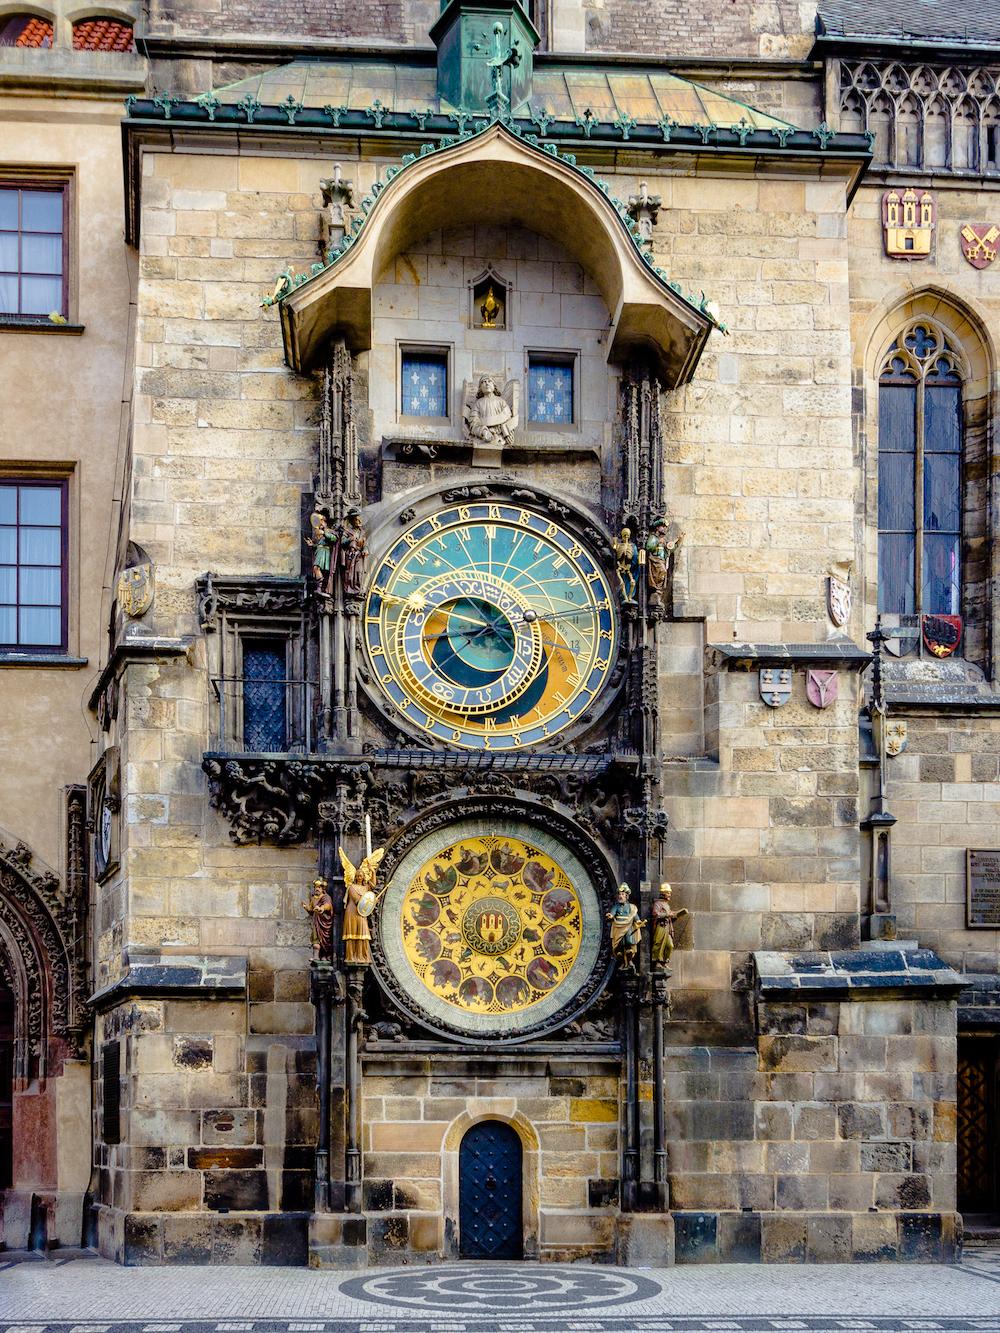 The astronomical clock on the south wall of Town Hall in Prague. (Dominik Michalek/Shutterstock)